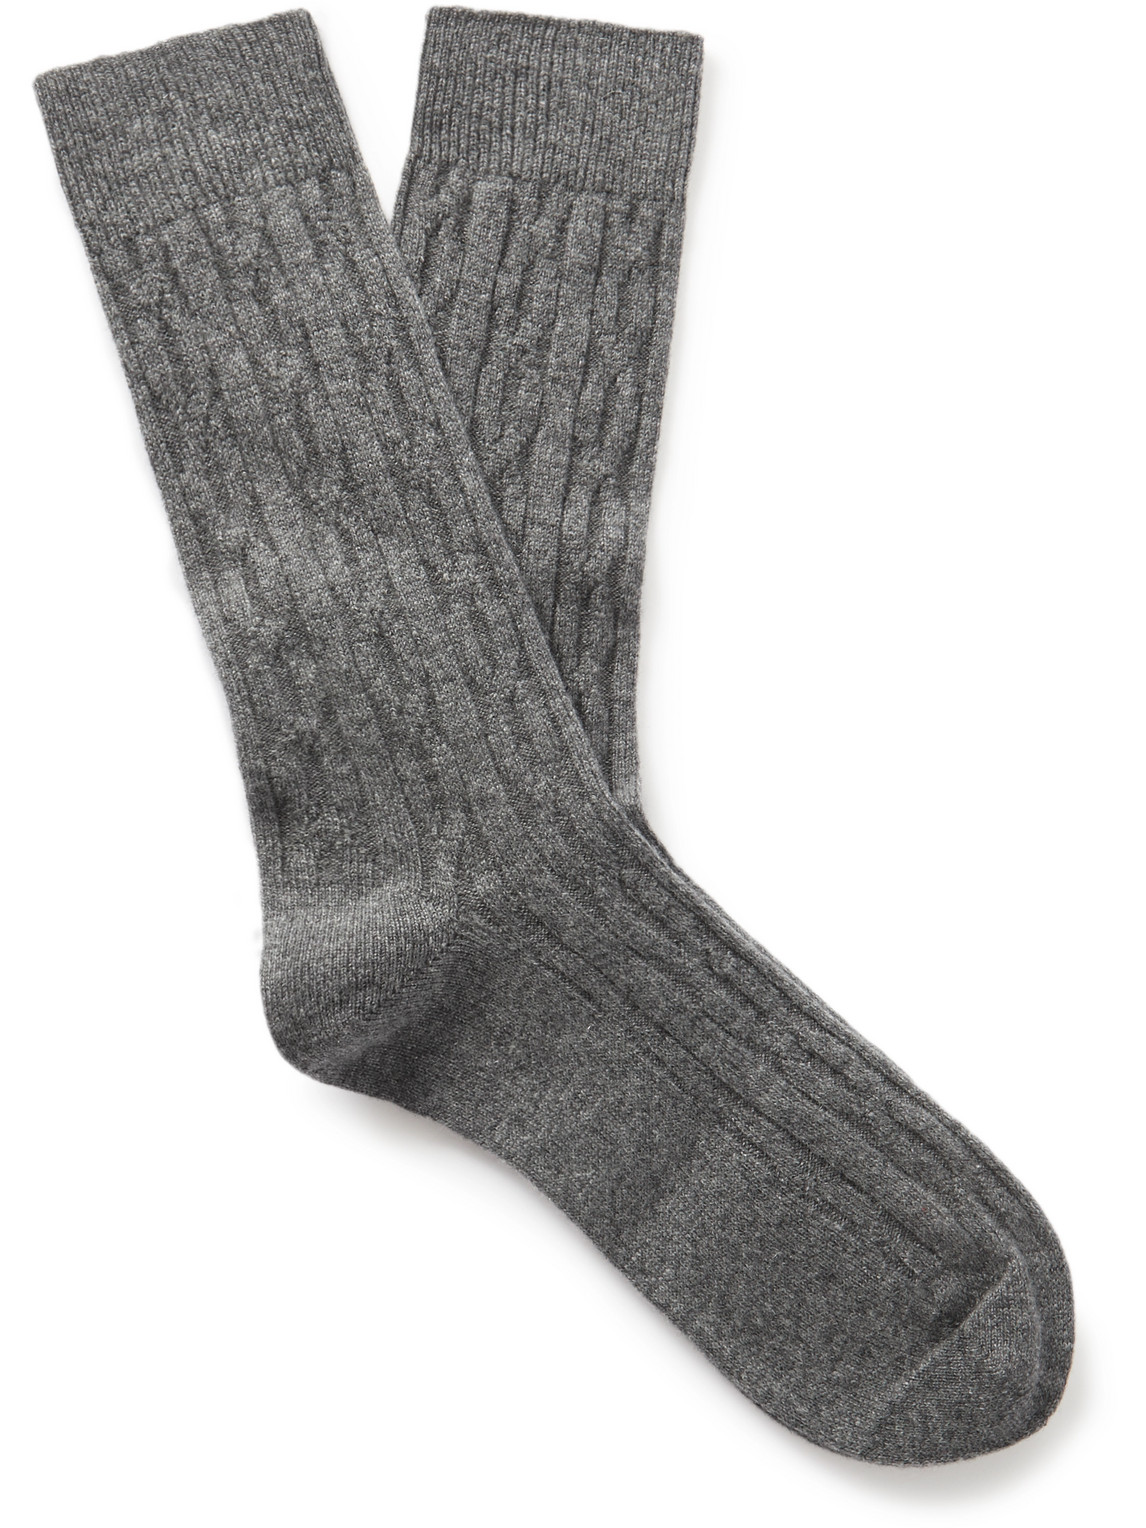 ANDERSON & SHEPPARD CABLE-KNIT CASHMERE SOCKS